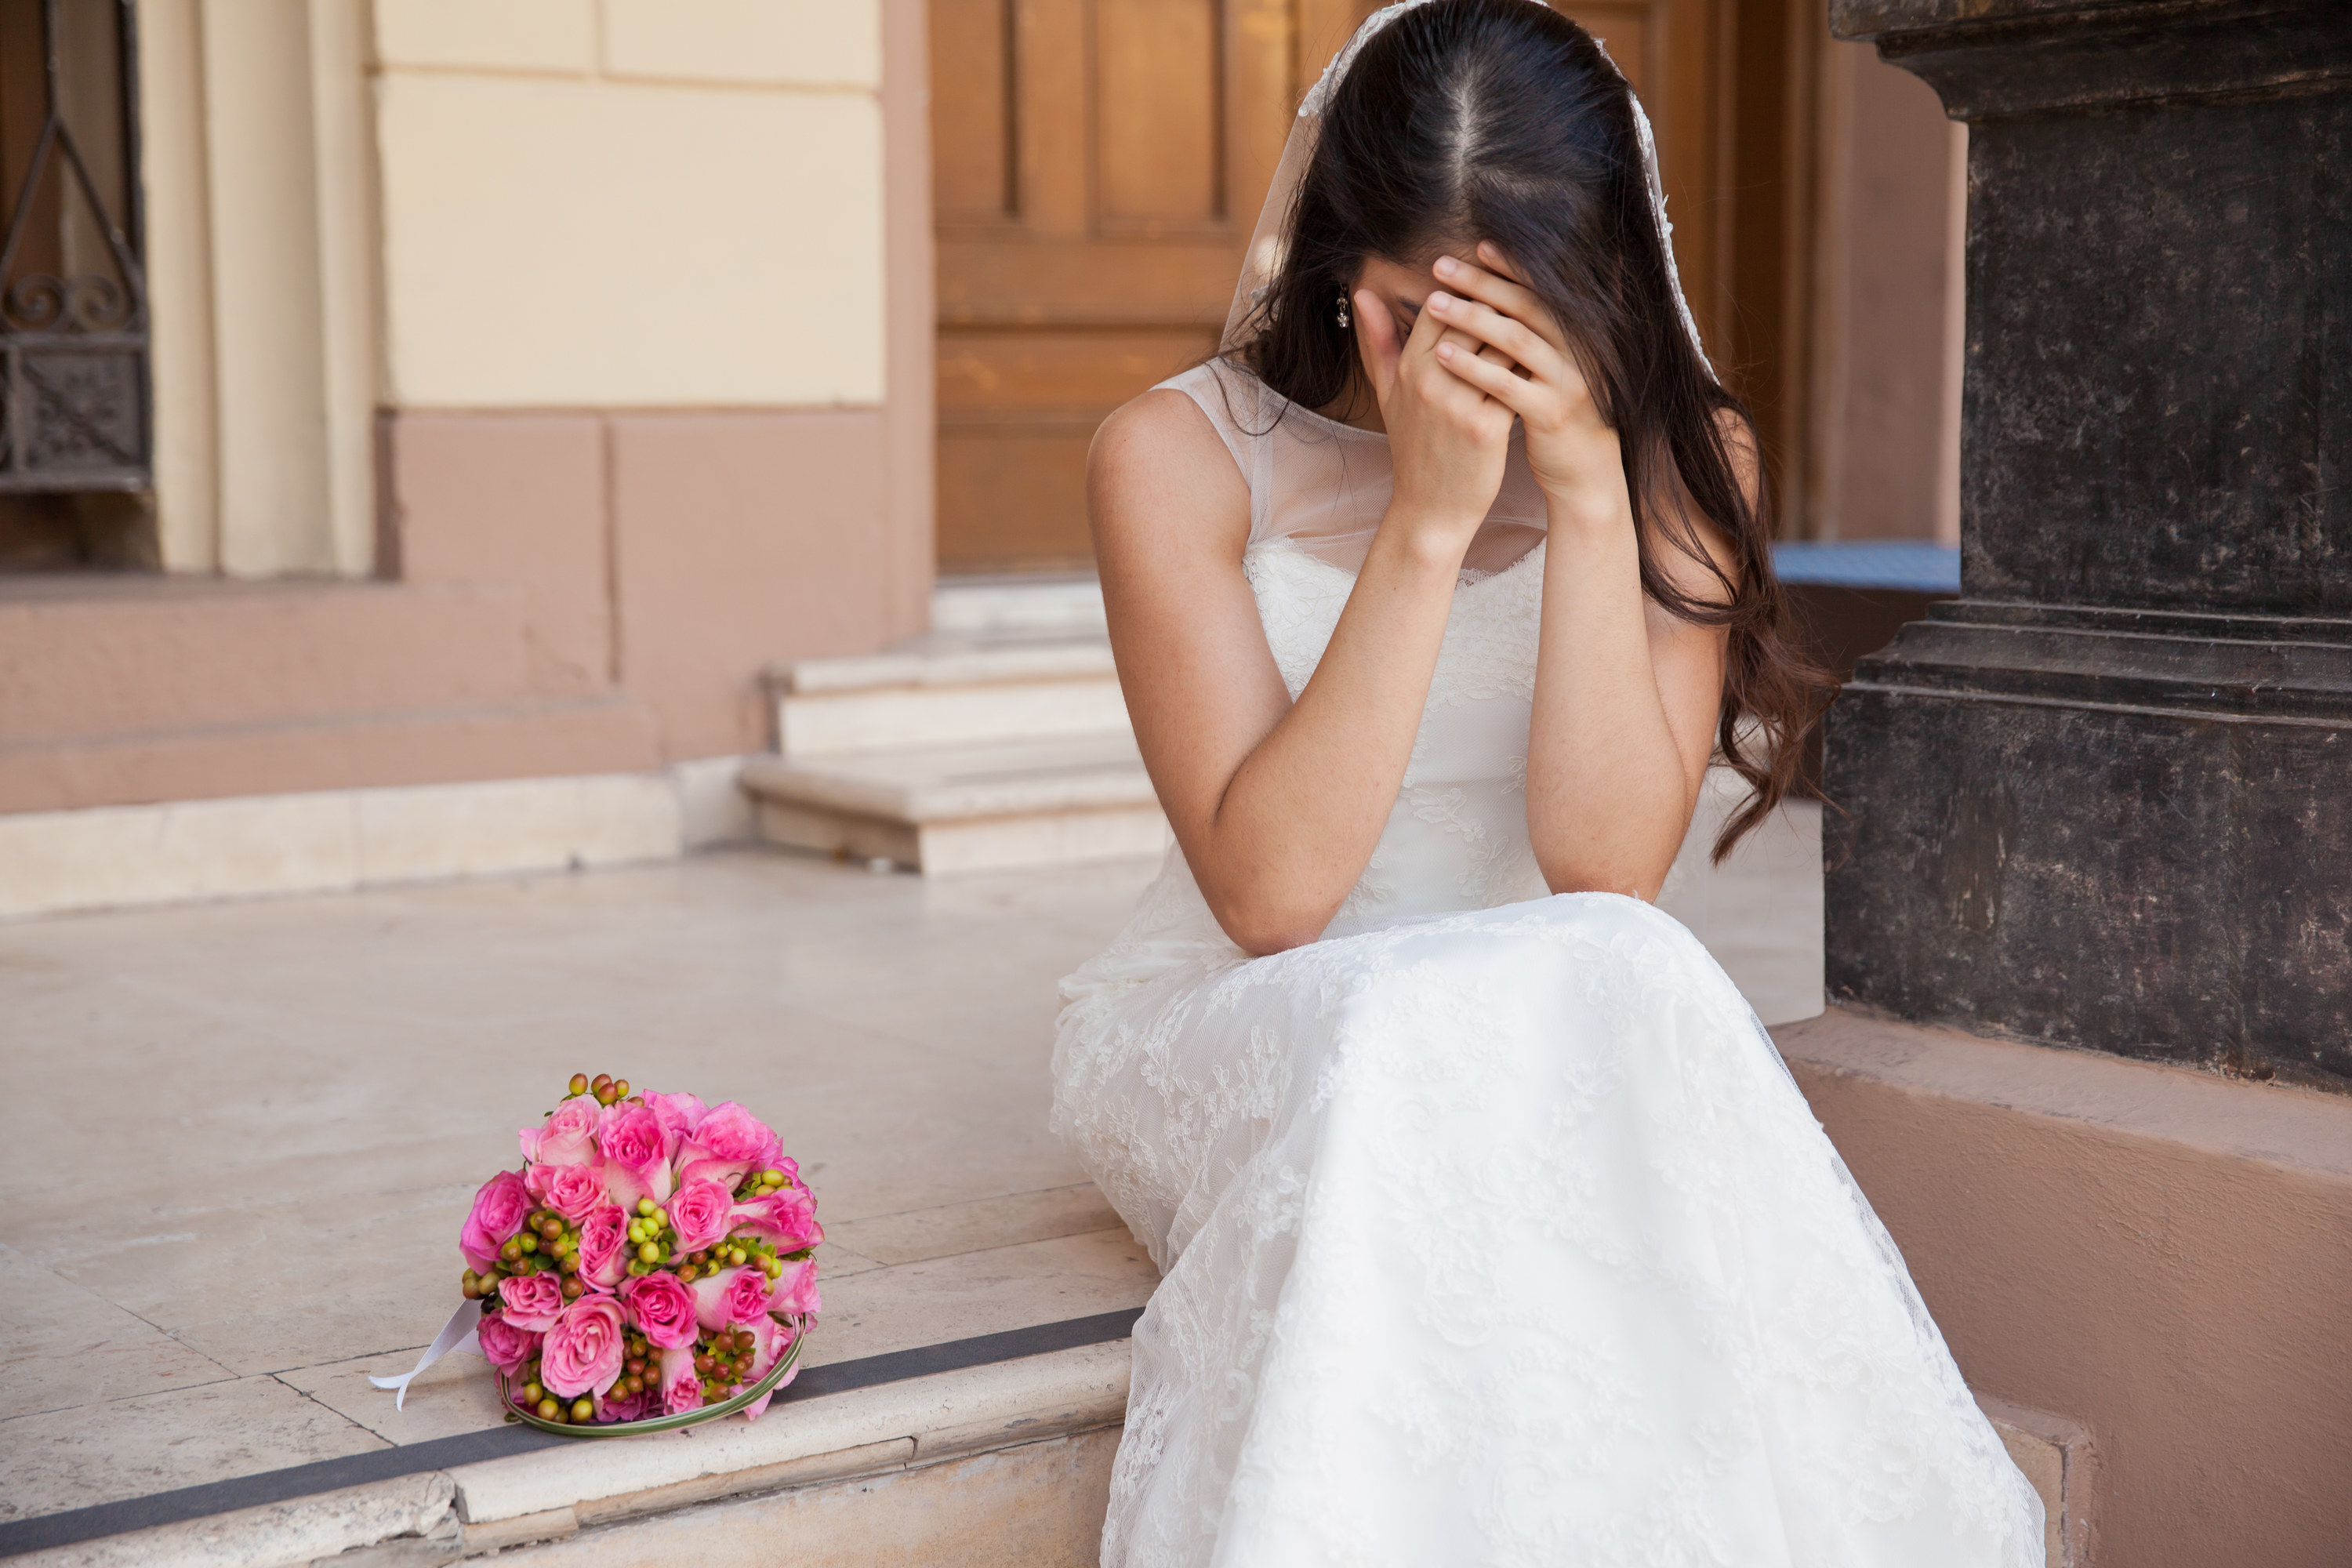 bride sitting on steps crying with bouquet next to her